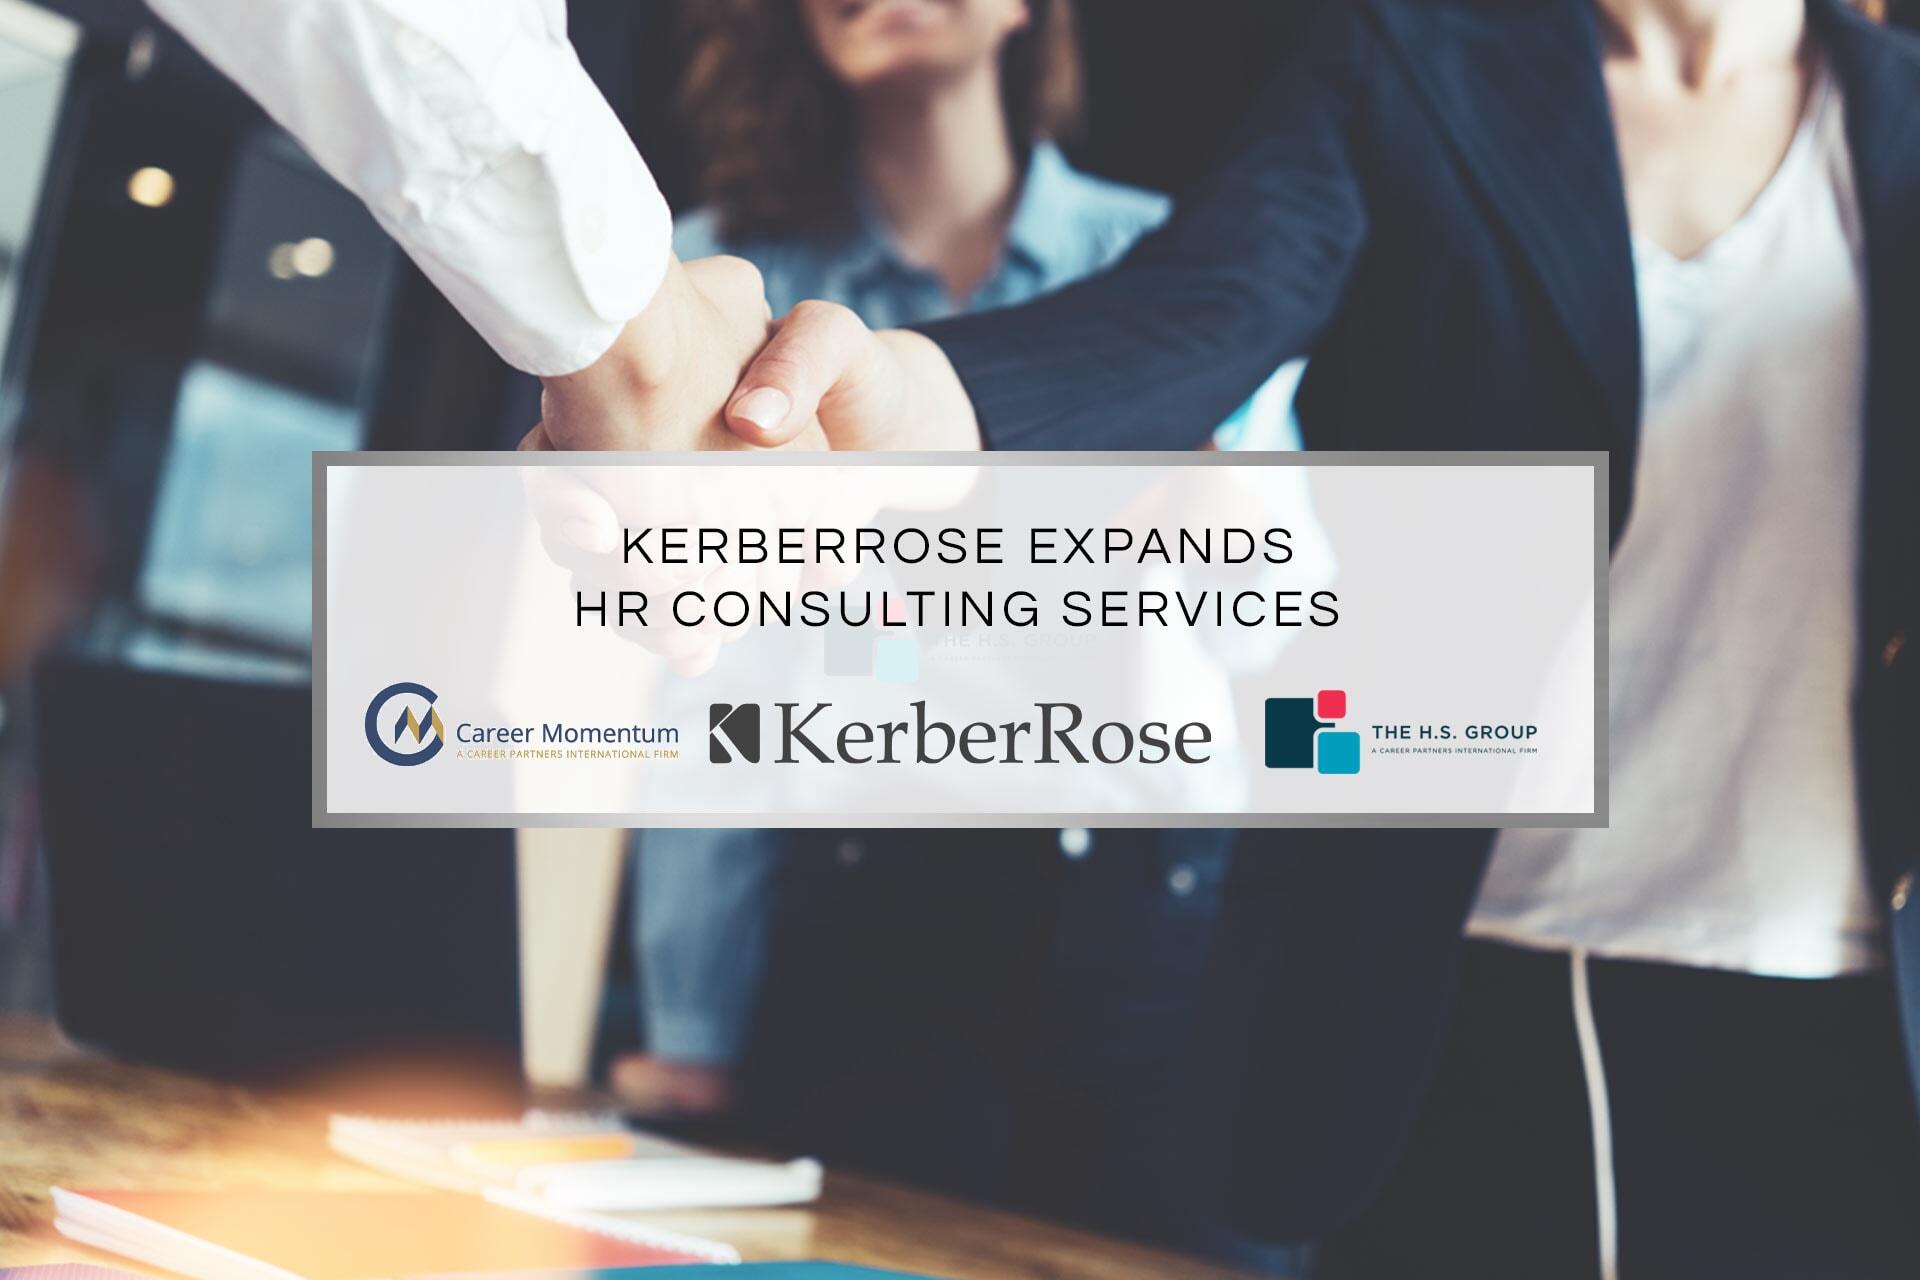 KerberRose Expands HR Consulting Services